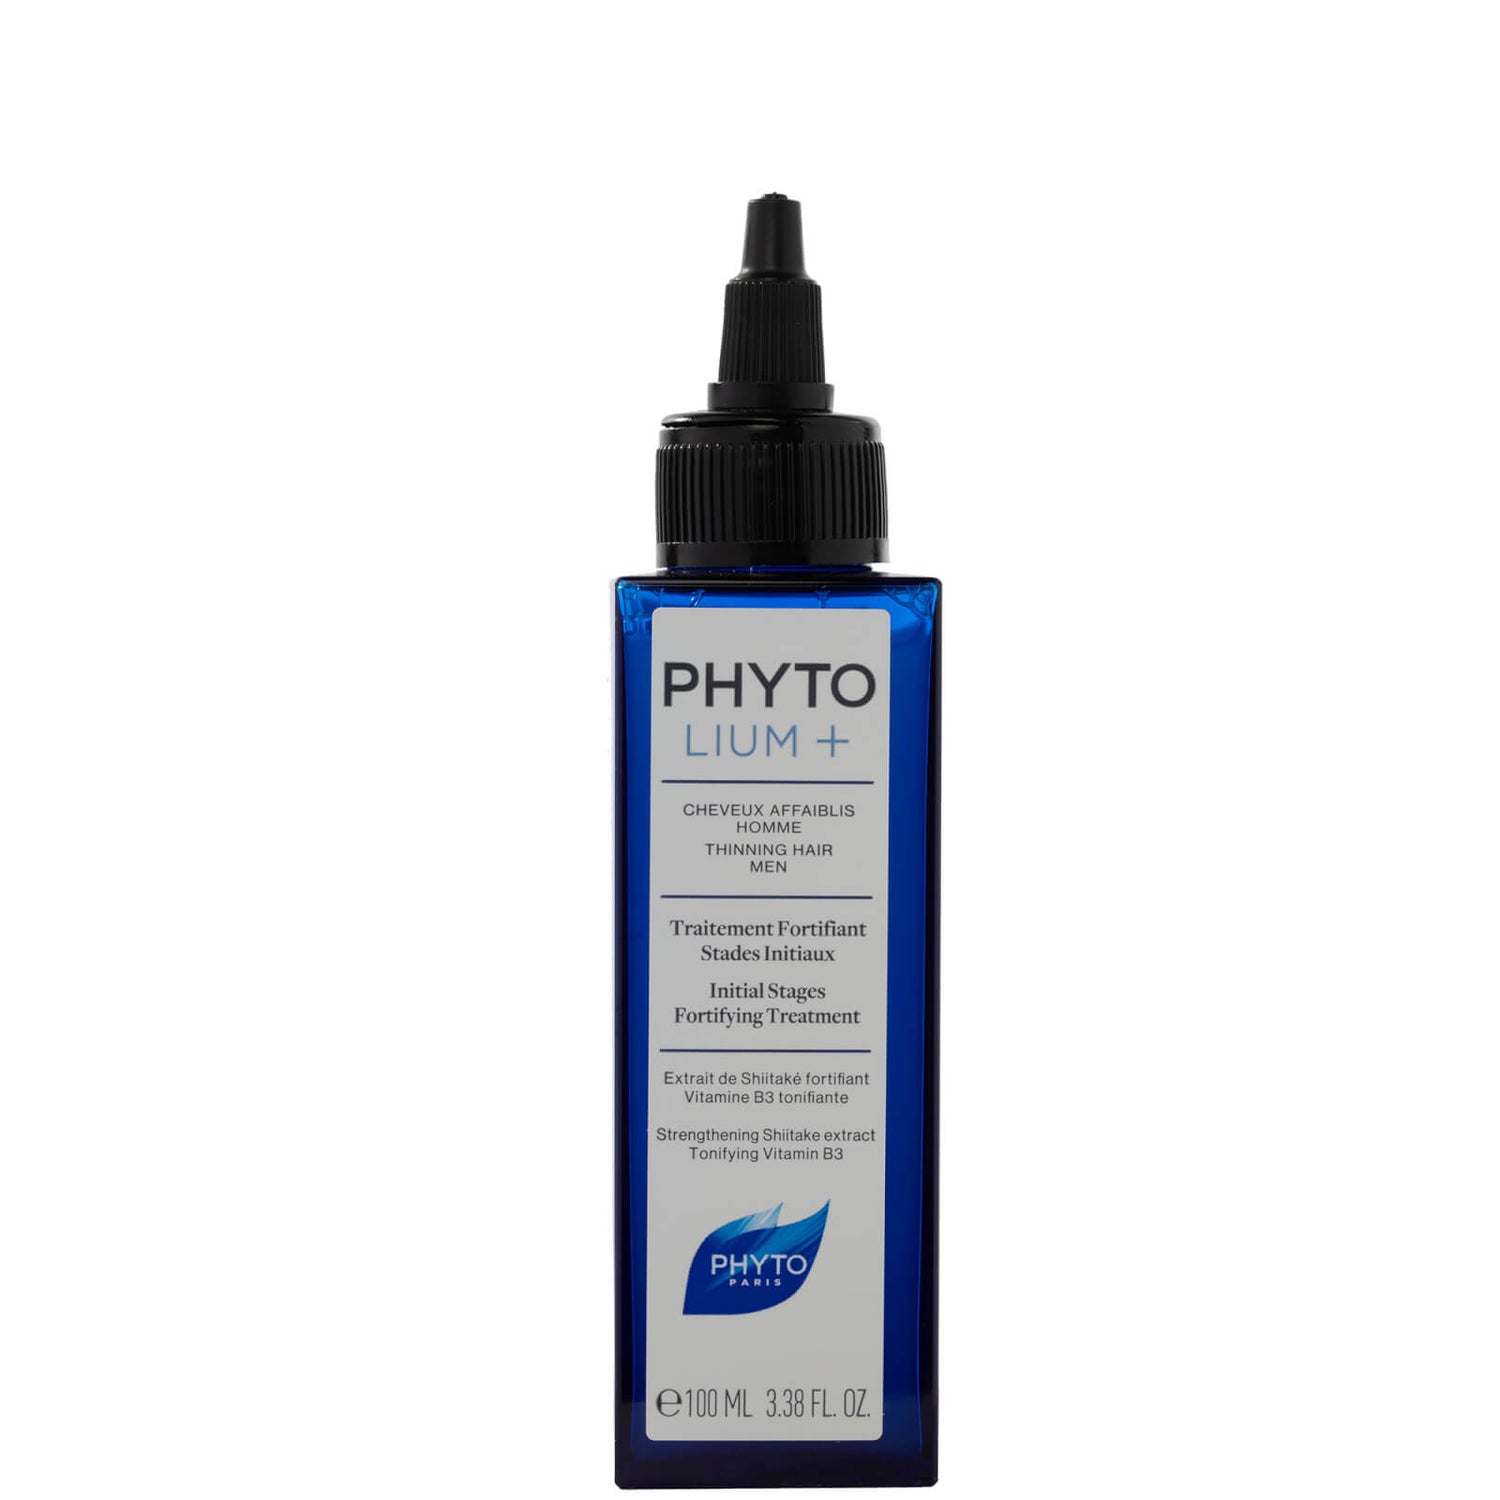 Phyto PHYTOLIUM+ Initial Stages Strengthening Treatment 3.38 oz